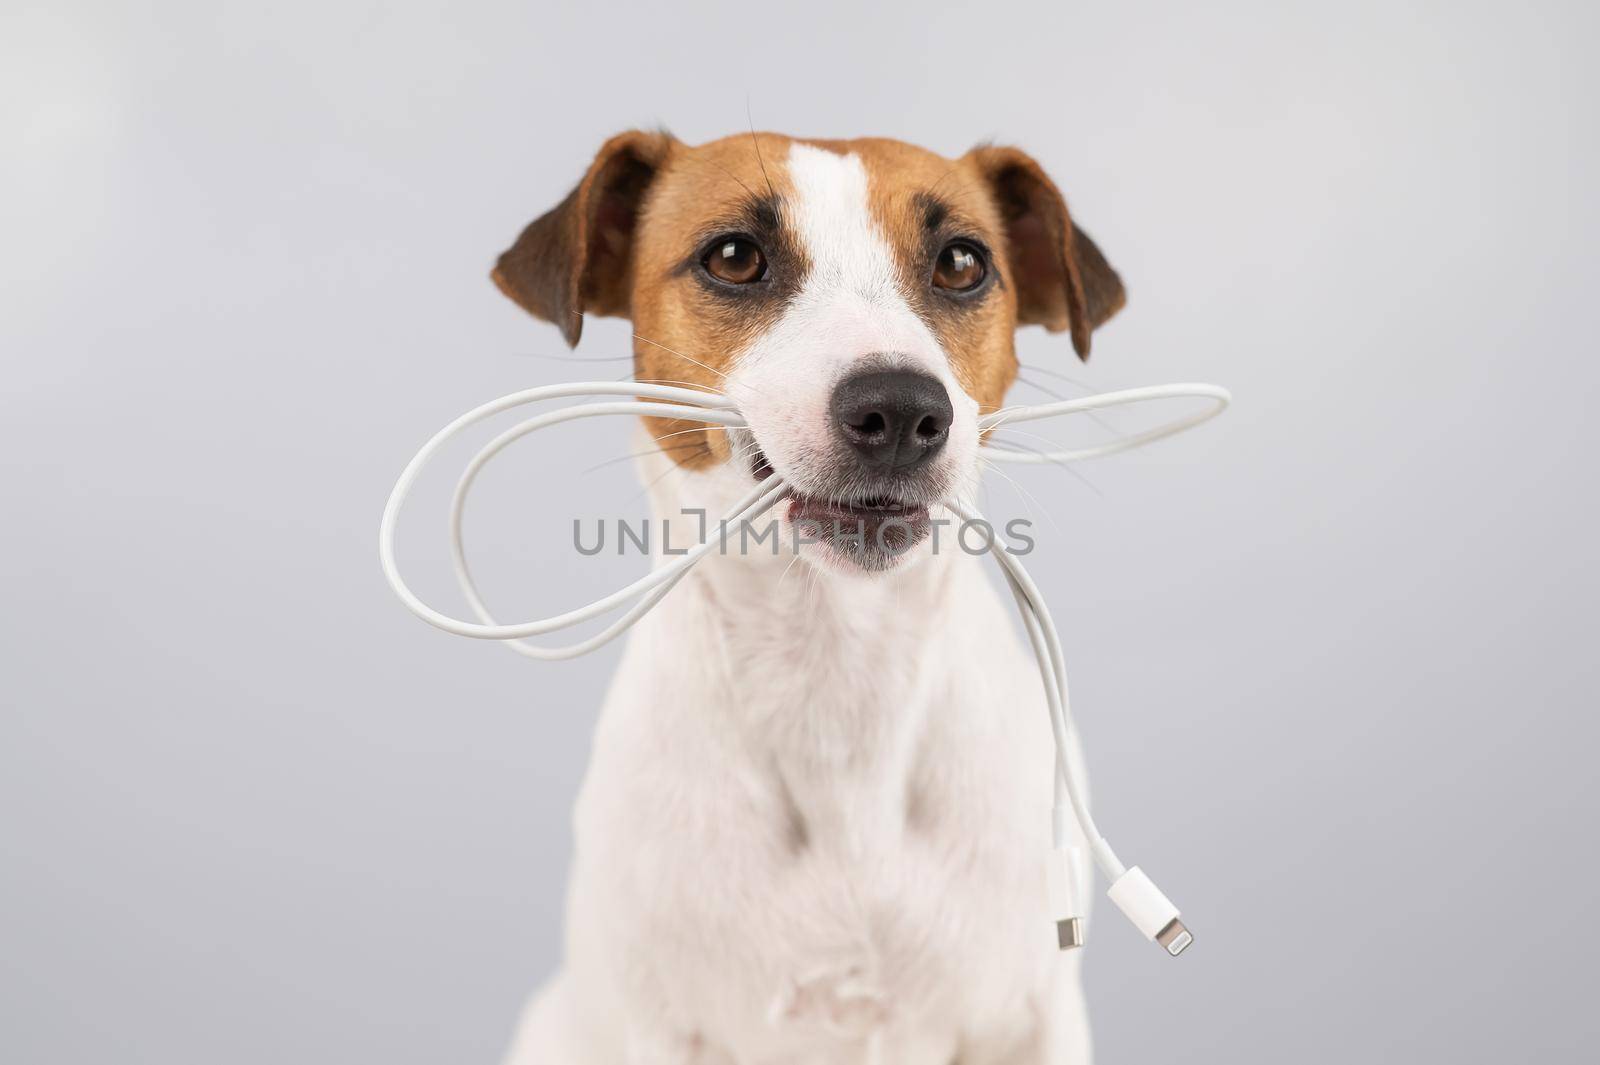 Jack russell terrier dog holding a type c cable in his teeth on a white background